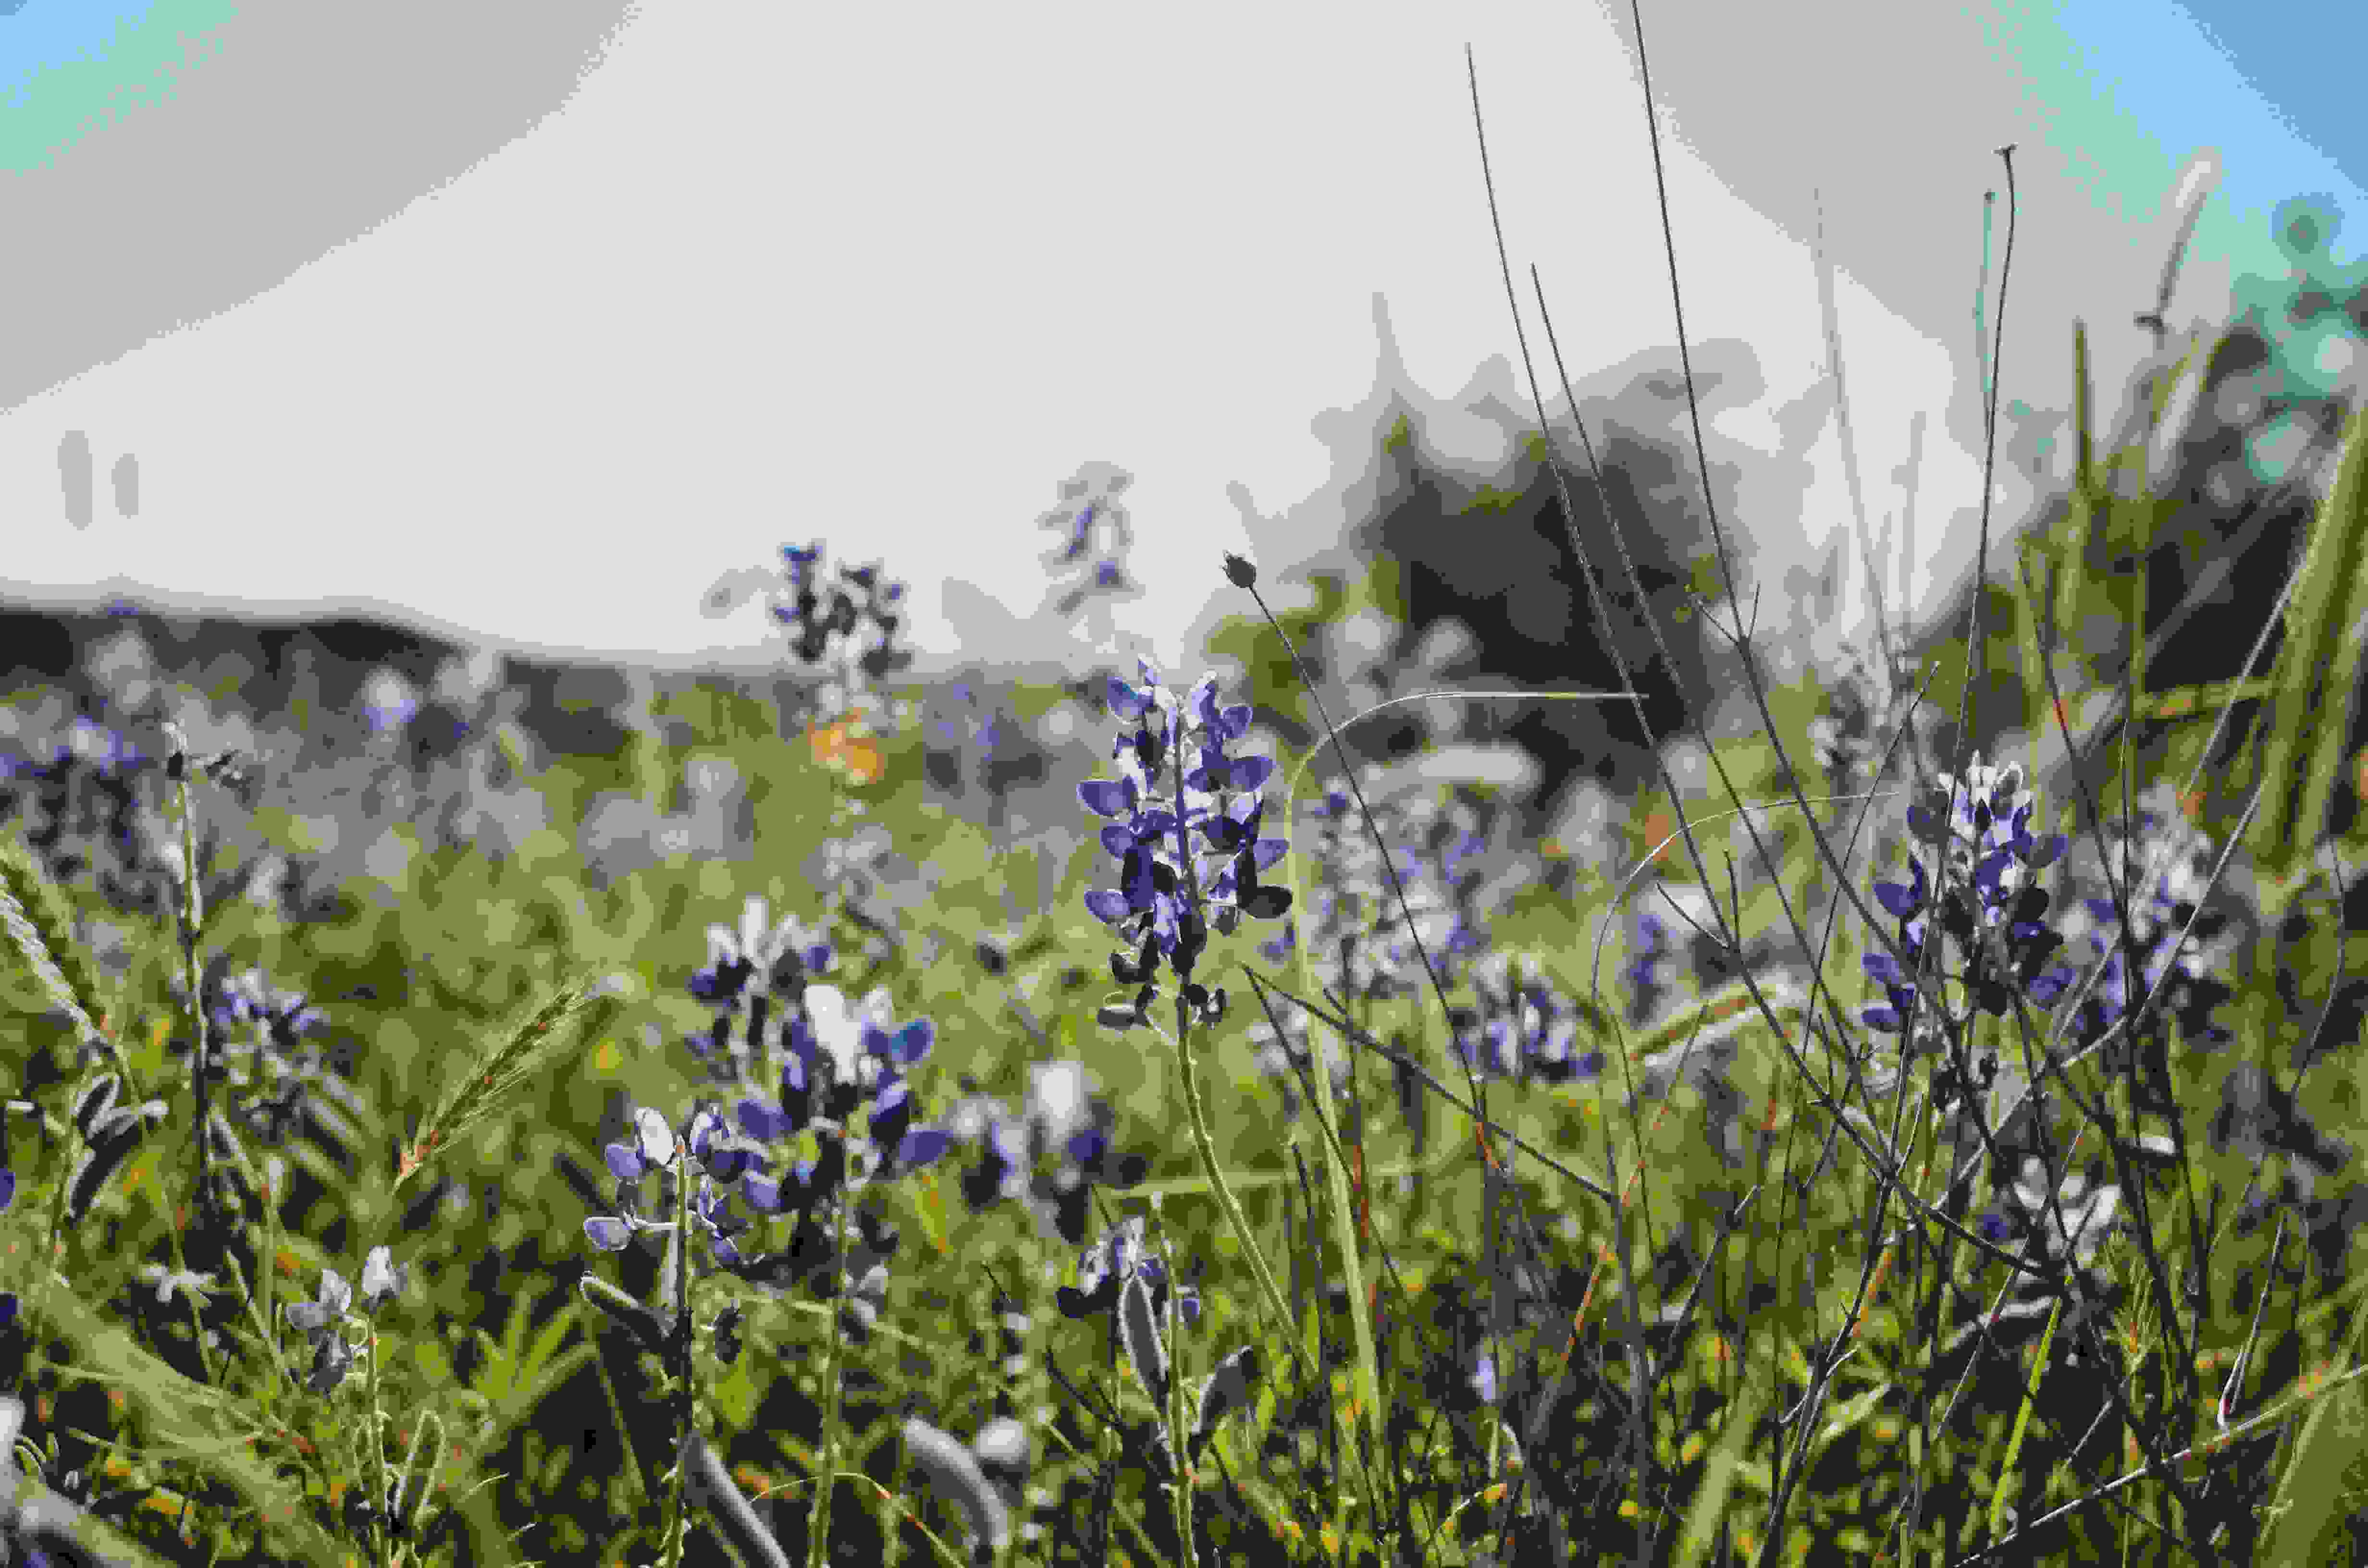 Seeing my two boys experience the vastness of these bluebonnets each spring is truly a highlight of my life. 